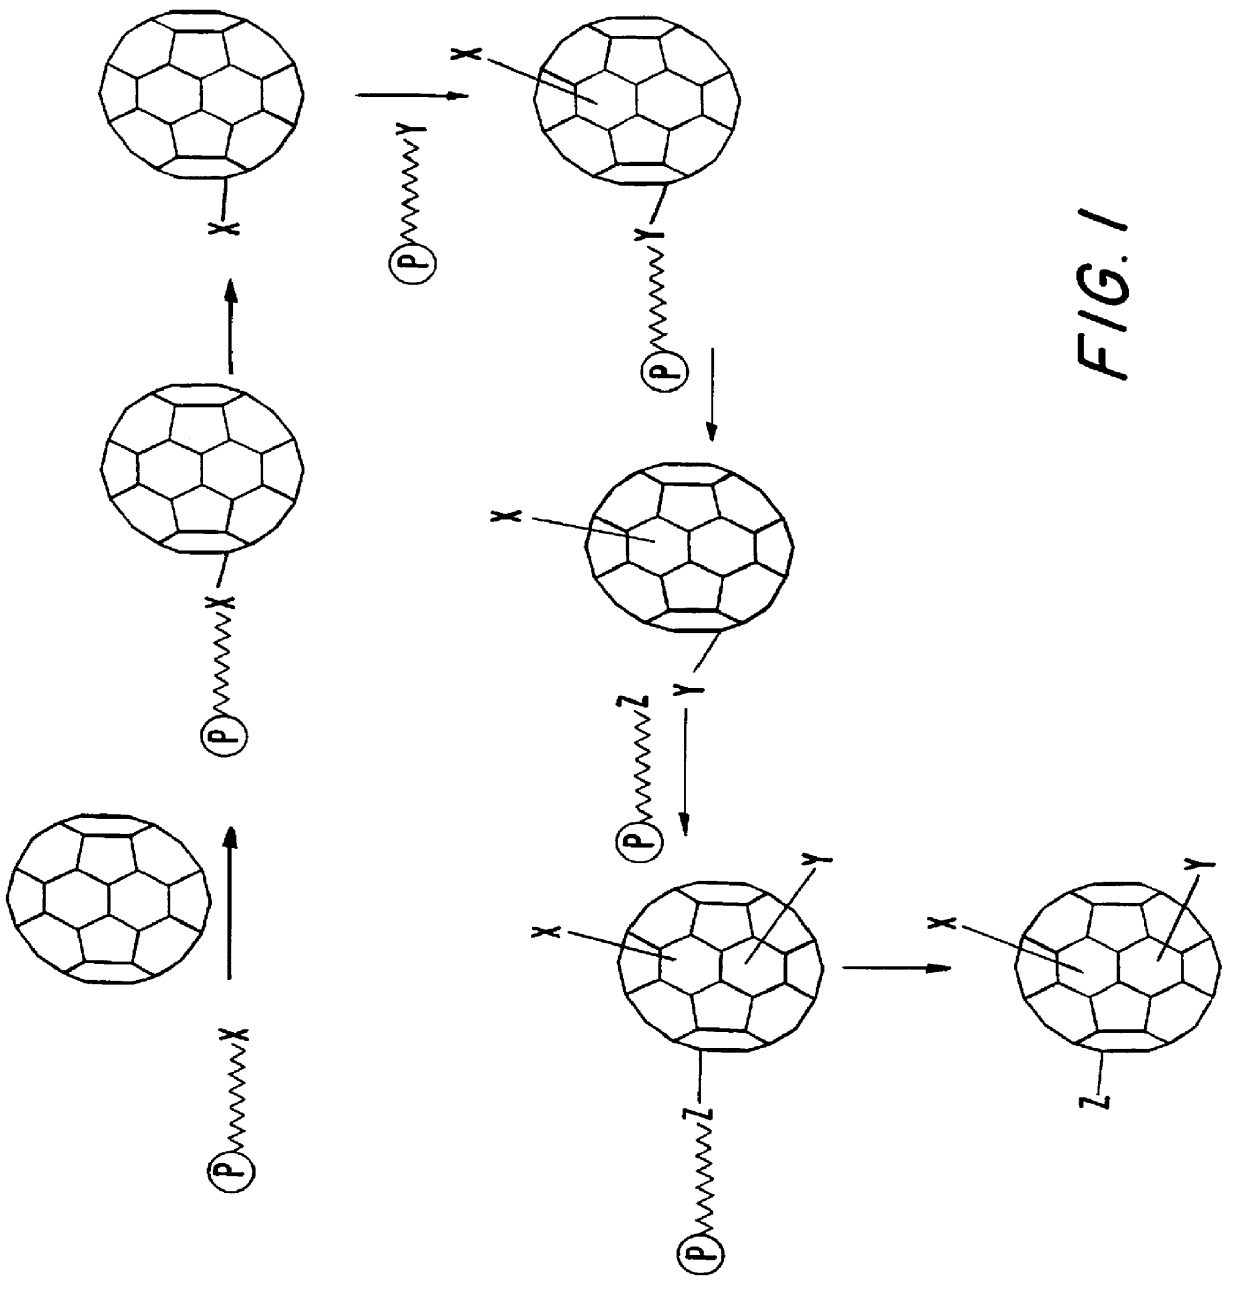 Multi-substituted fullerenes and methods for their preparation and characterization